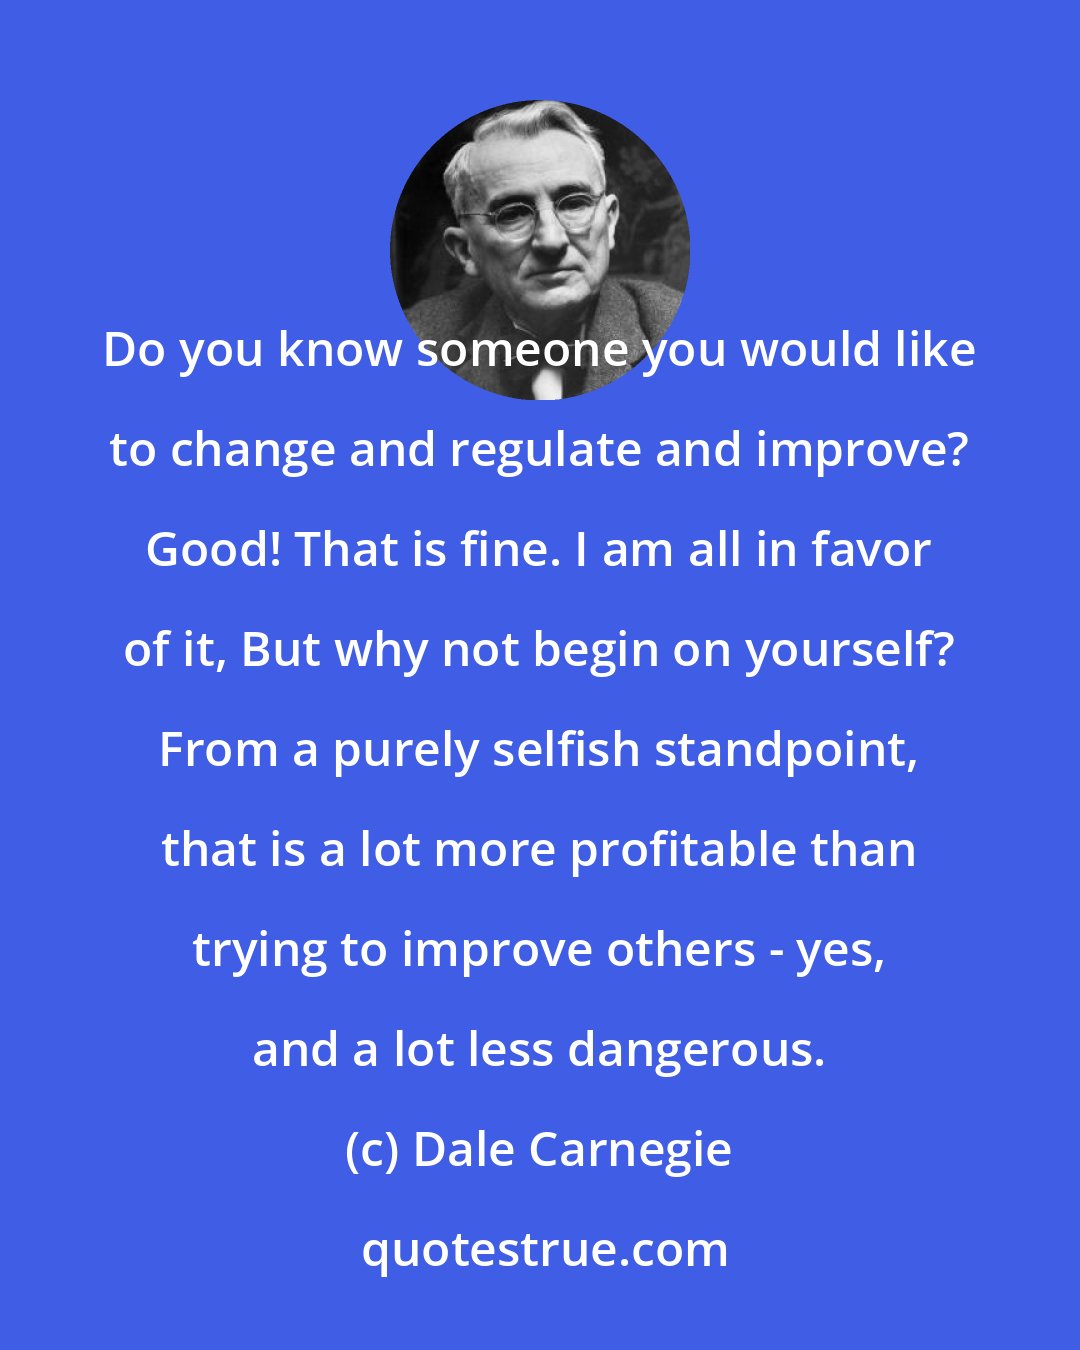 Dale Carnegie: Do you know someone you would like to change and regulate and improve? Good! That is fine. I am all in favor of it, But why not begin on yourself? From a purely selfish standpoint, that is a lot more profitable than trying to improve others - yes, and a lot less dangerous.